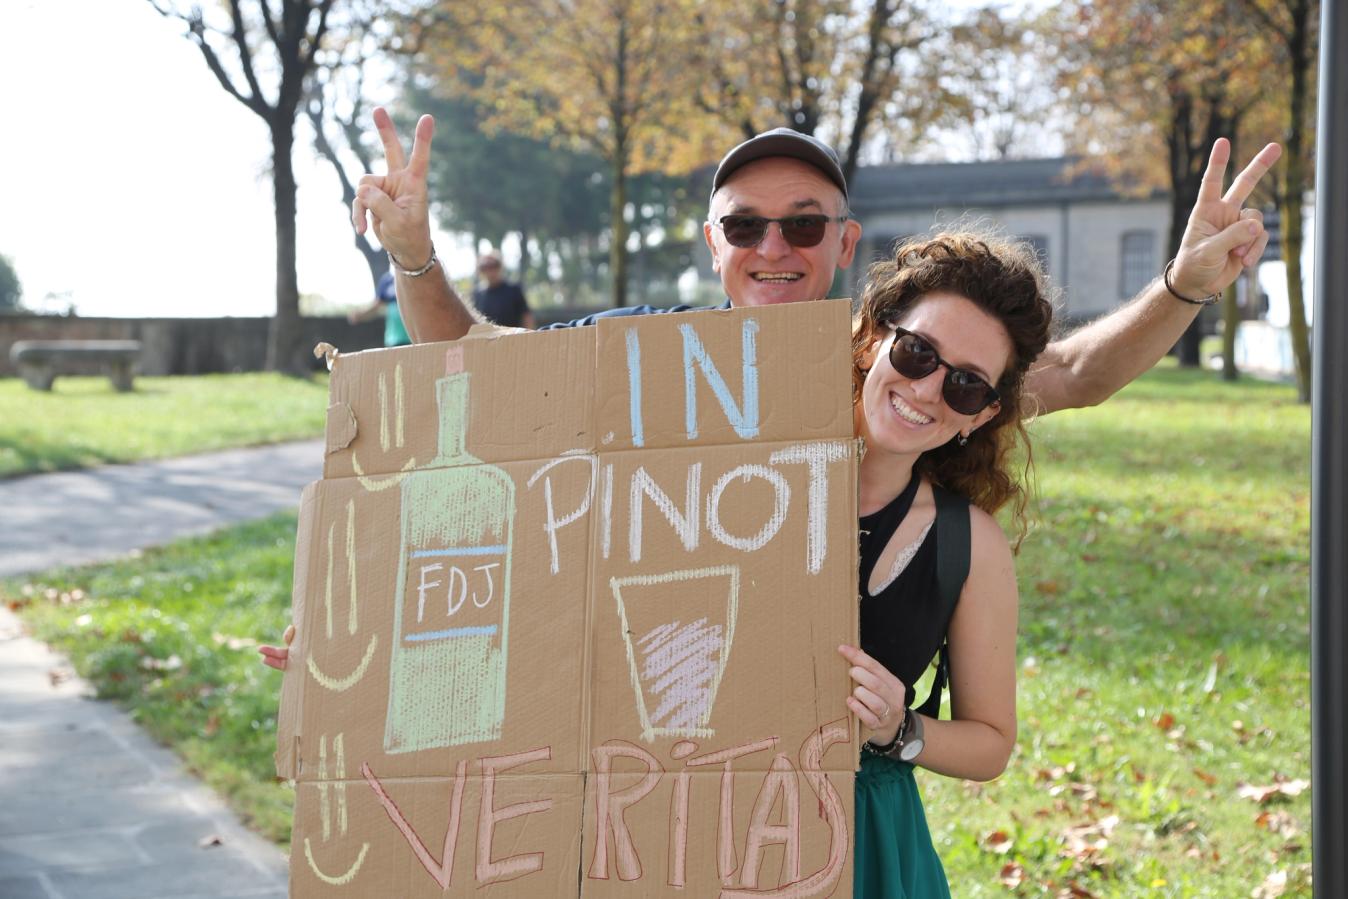 ‘In Pinot, there is truth,’ a play on words from the Latin in vino veritas - in wine there is truth